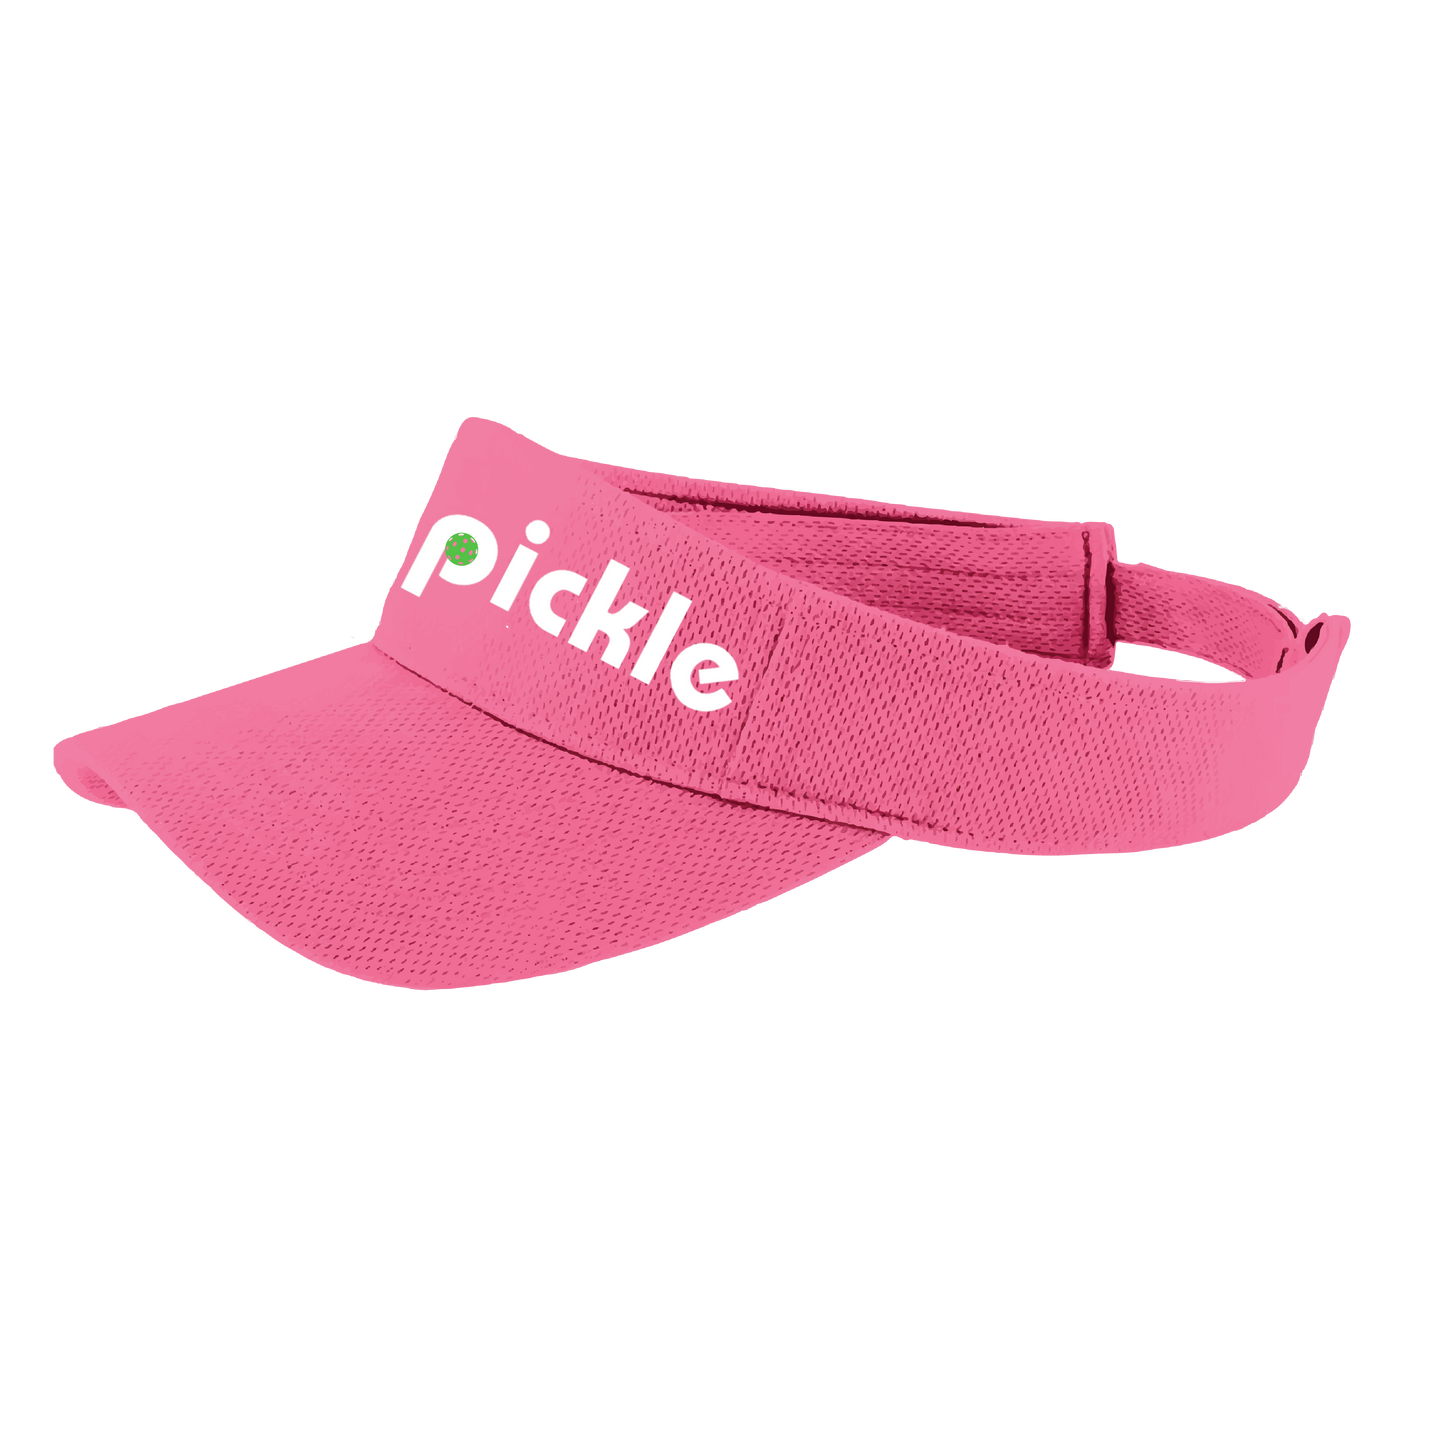 This practical pickleball visor is great for players looking to keep the sun out of their eyes as they focus on the game. Constructed with 100% polyester with closed-hole flat back mesh and PosiCharge Technology, this visor wicks away moisture for added comfort. The back closure is a hook and loop style that adjusts to fit most adults. With this visor, pickleball players can stay comfortable and look great.